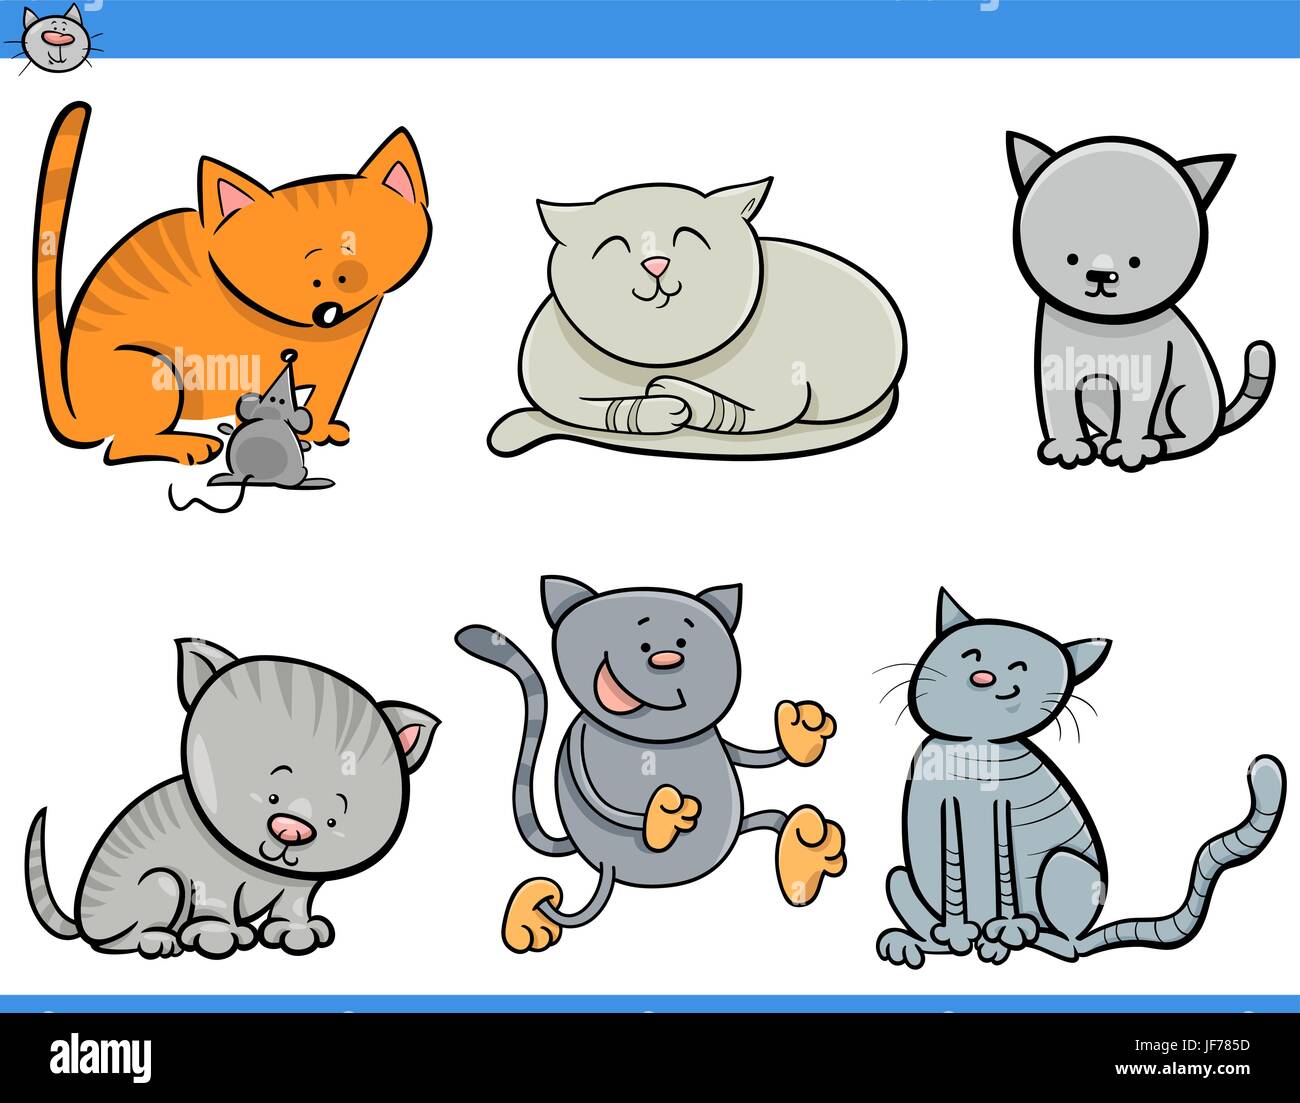 Cartoon Illustration of Cats or Kittens Animal Characters Set Stock Vector